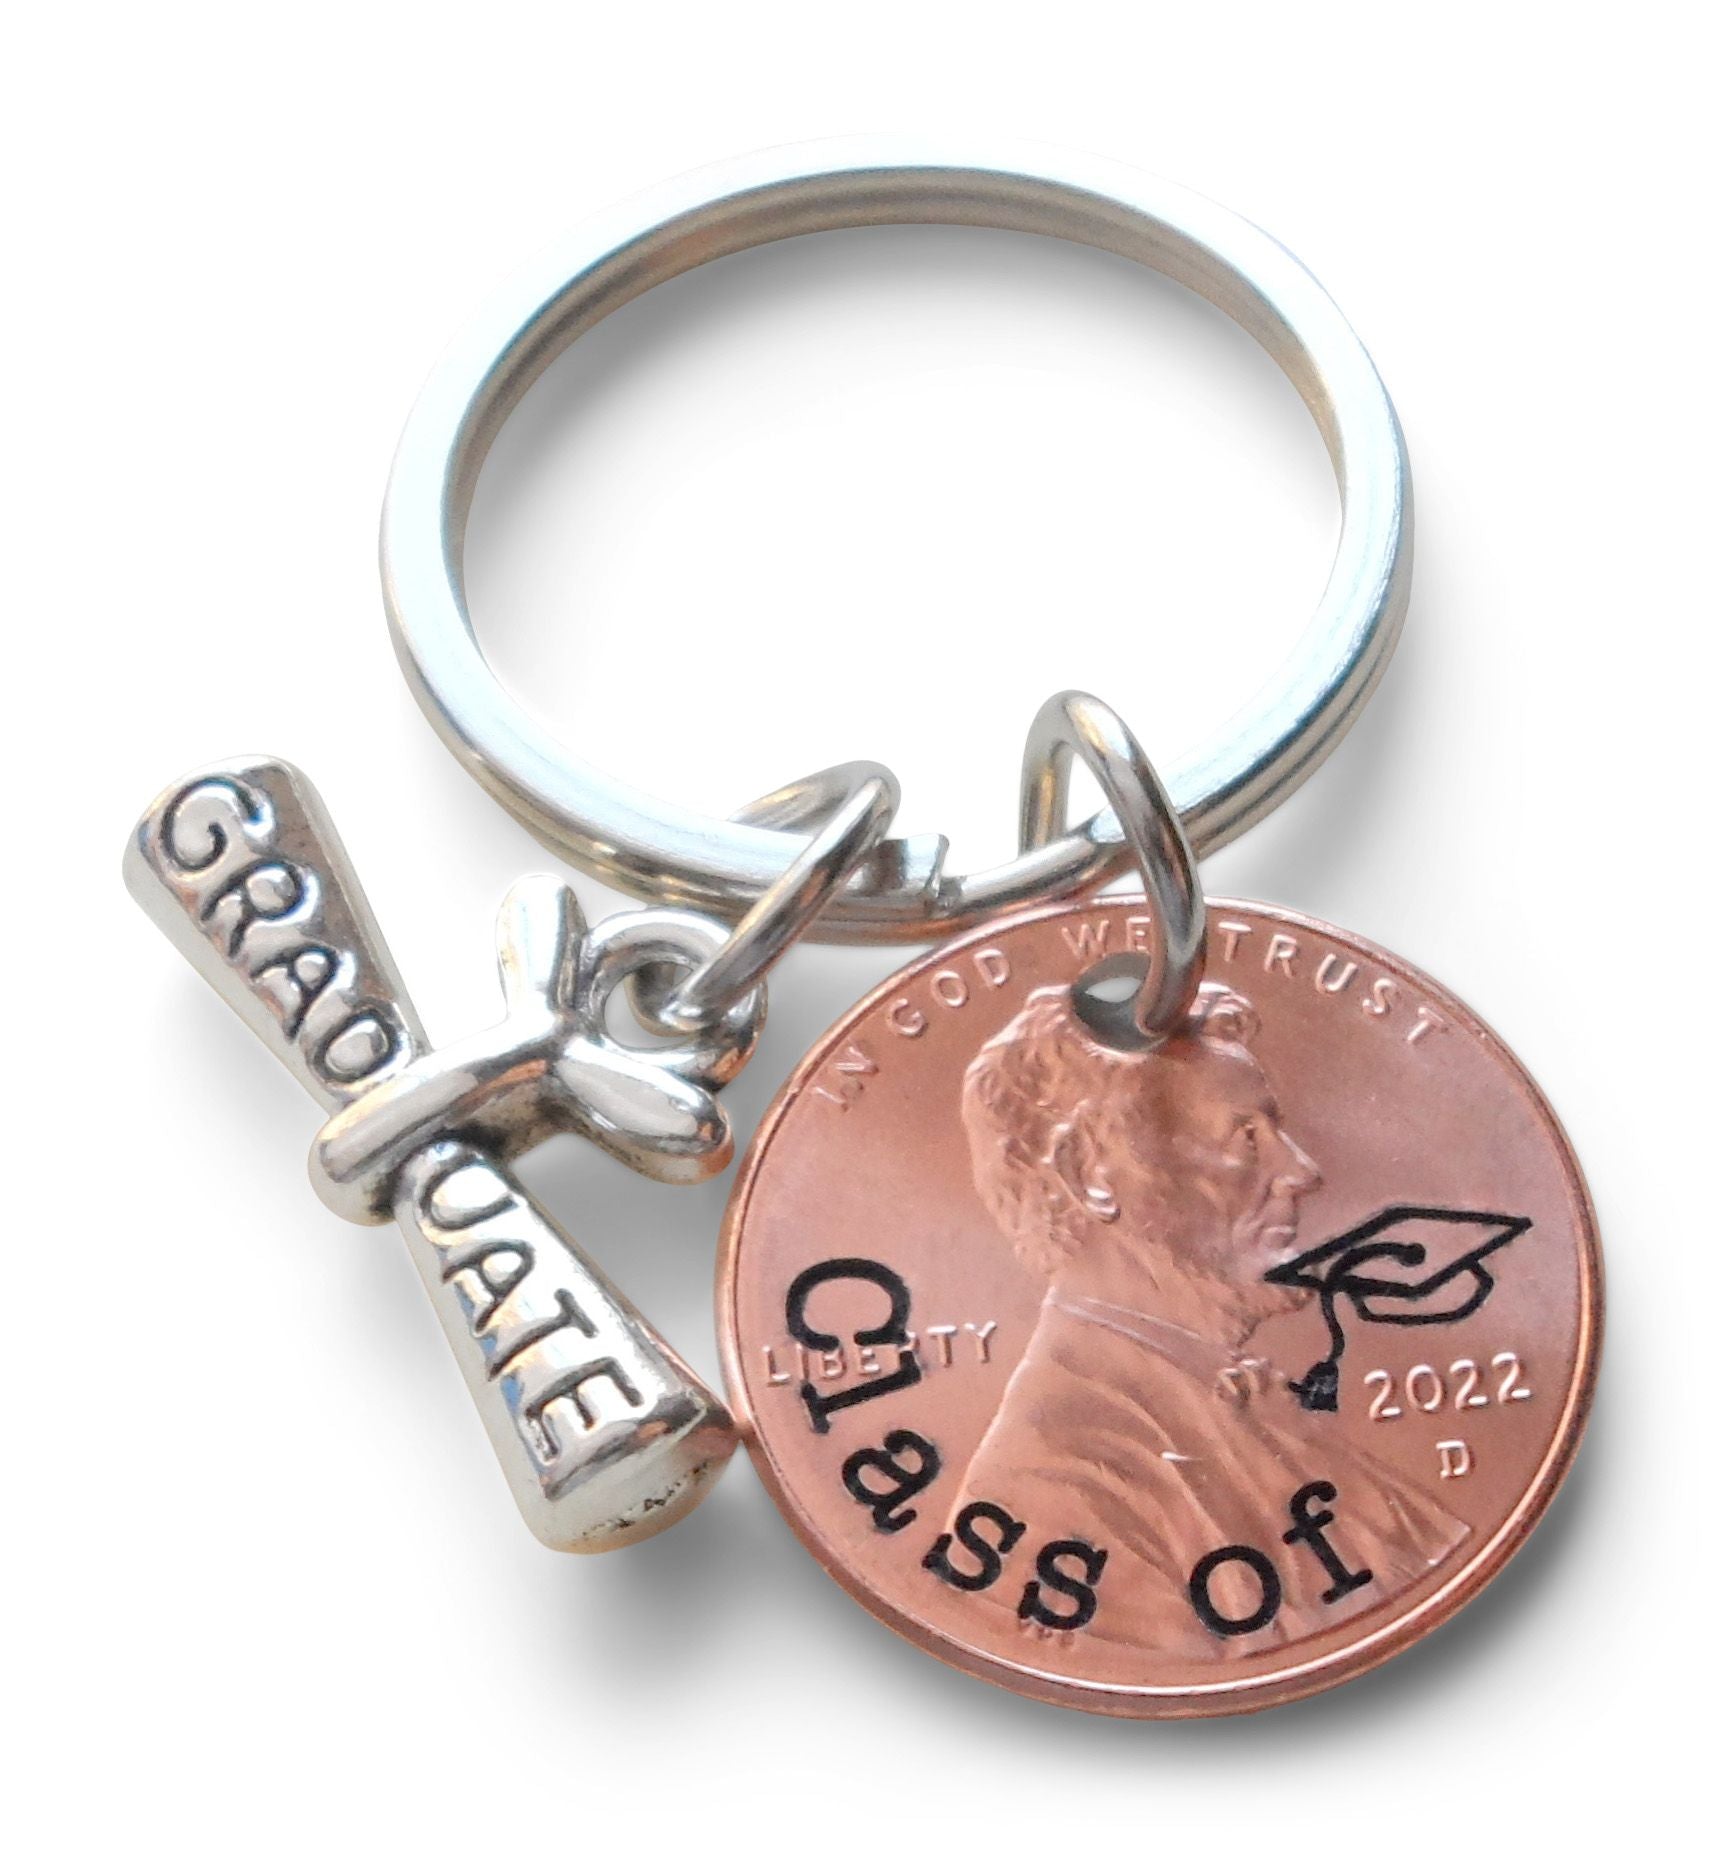 Class of 2023 Graduation Keychain Engraved Gold Key Ring with